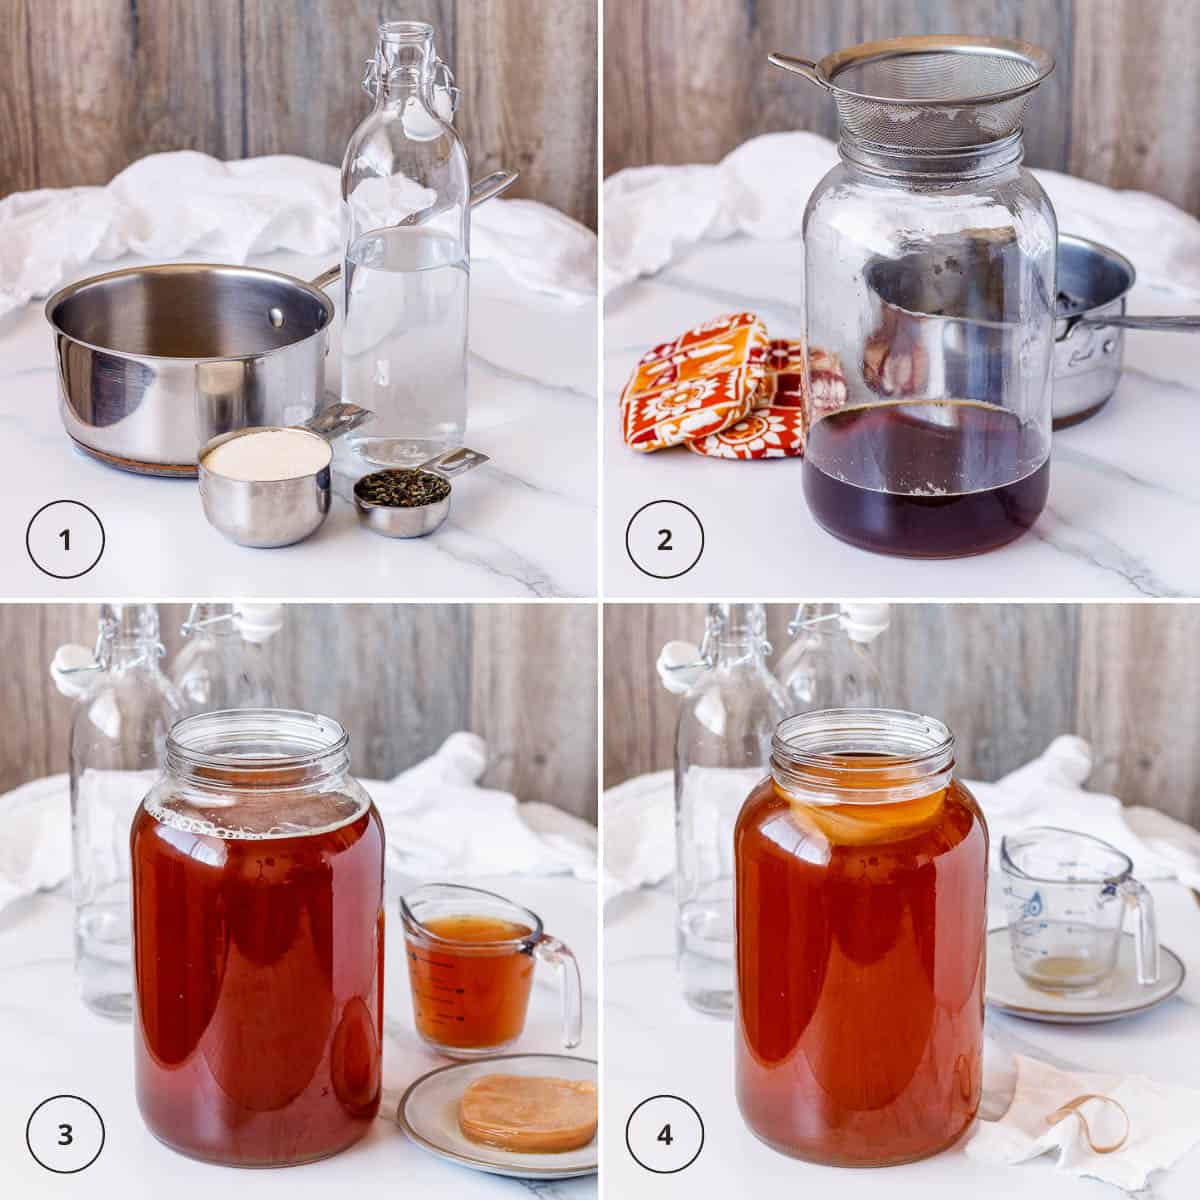 Boil water with sugar and tea, cool and add SCOBY to brew kombucha.